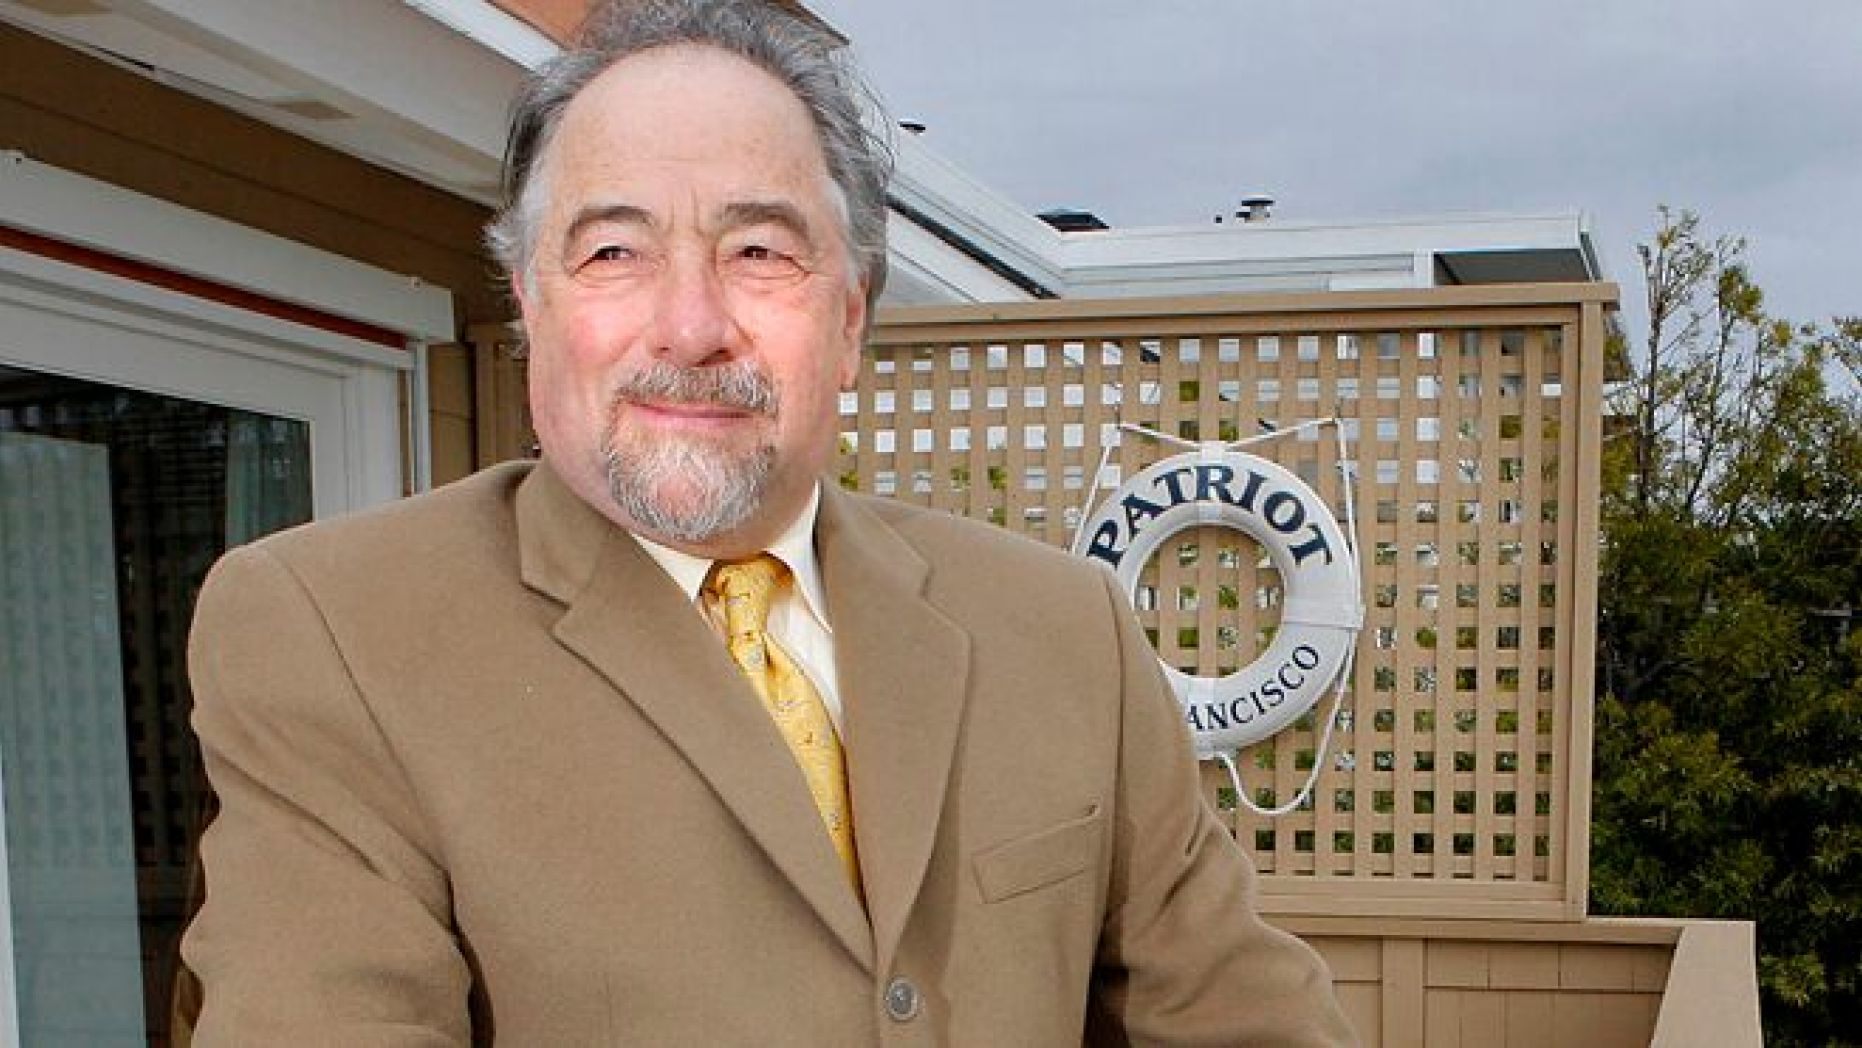 Radio presenter Michael Savage asked for comments after the Rush Limbaugh Cancer update